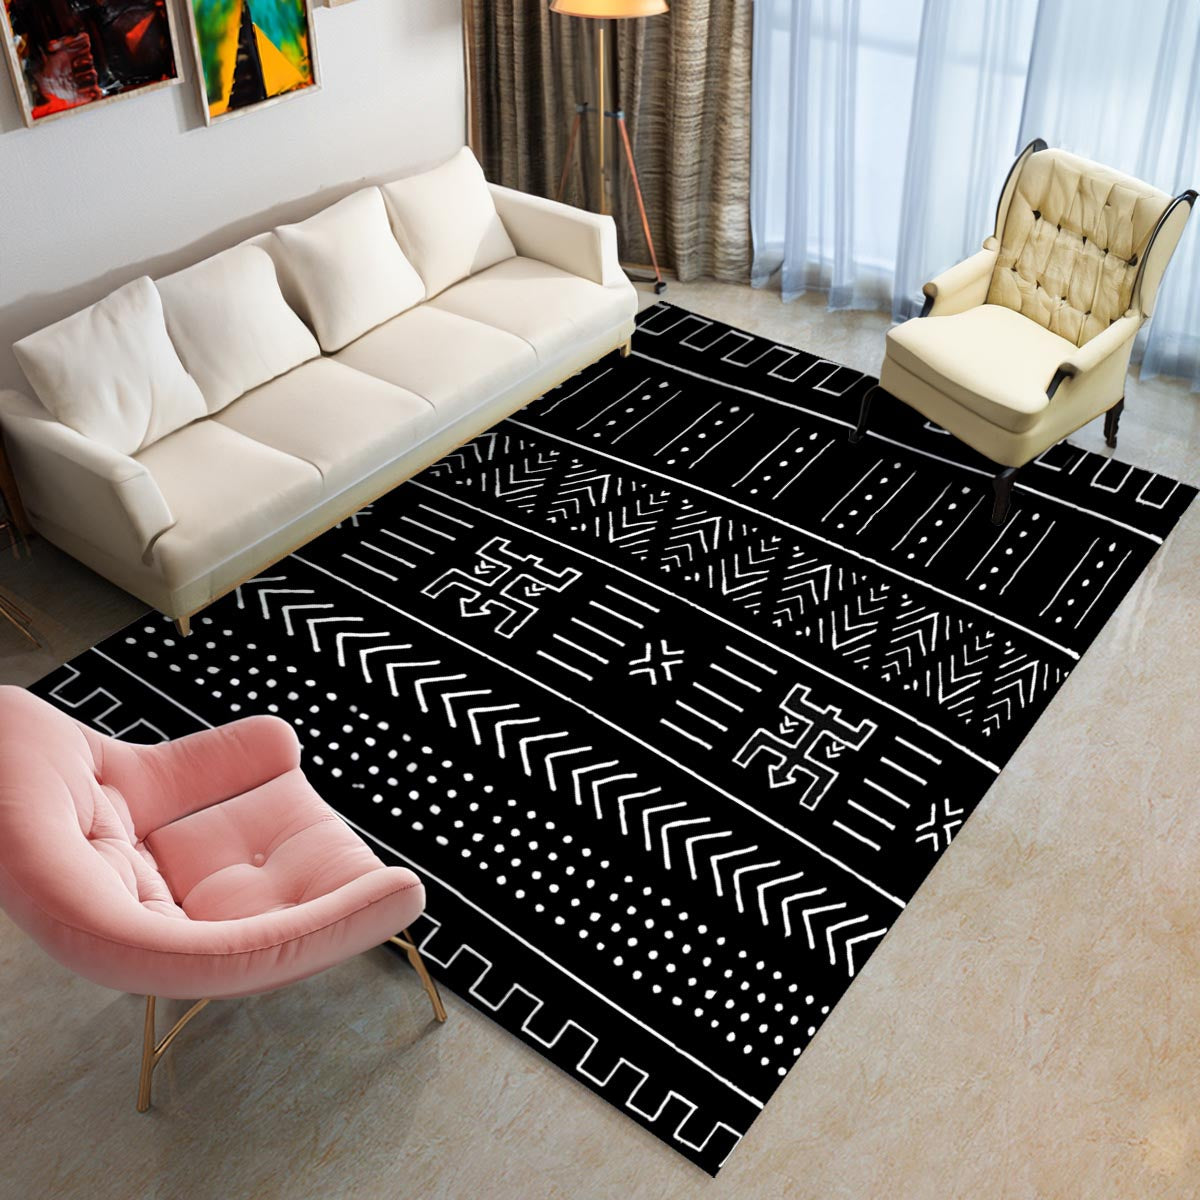 Black and White African Rug Carpet Mudcloth Print